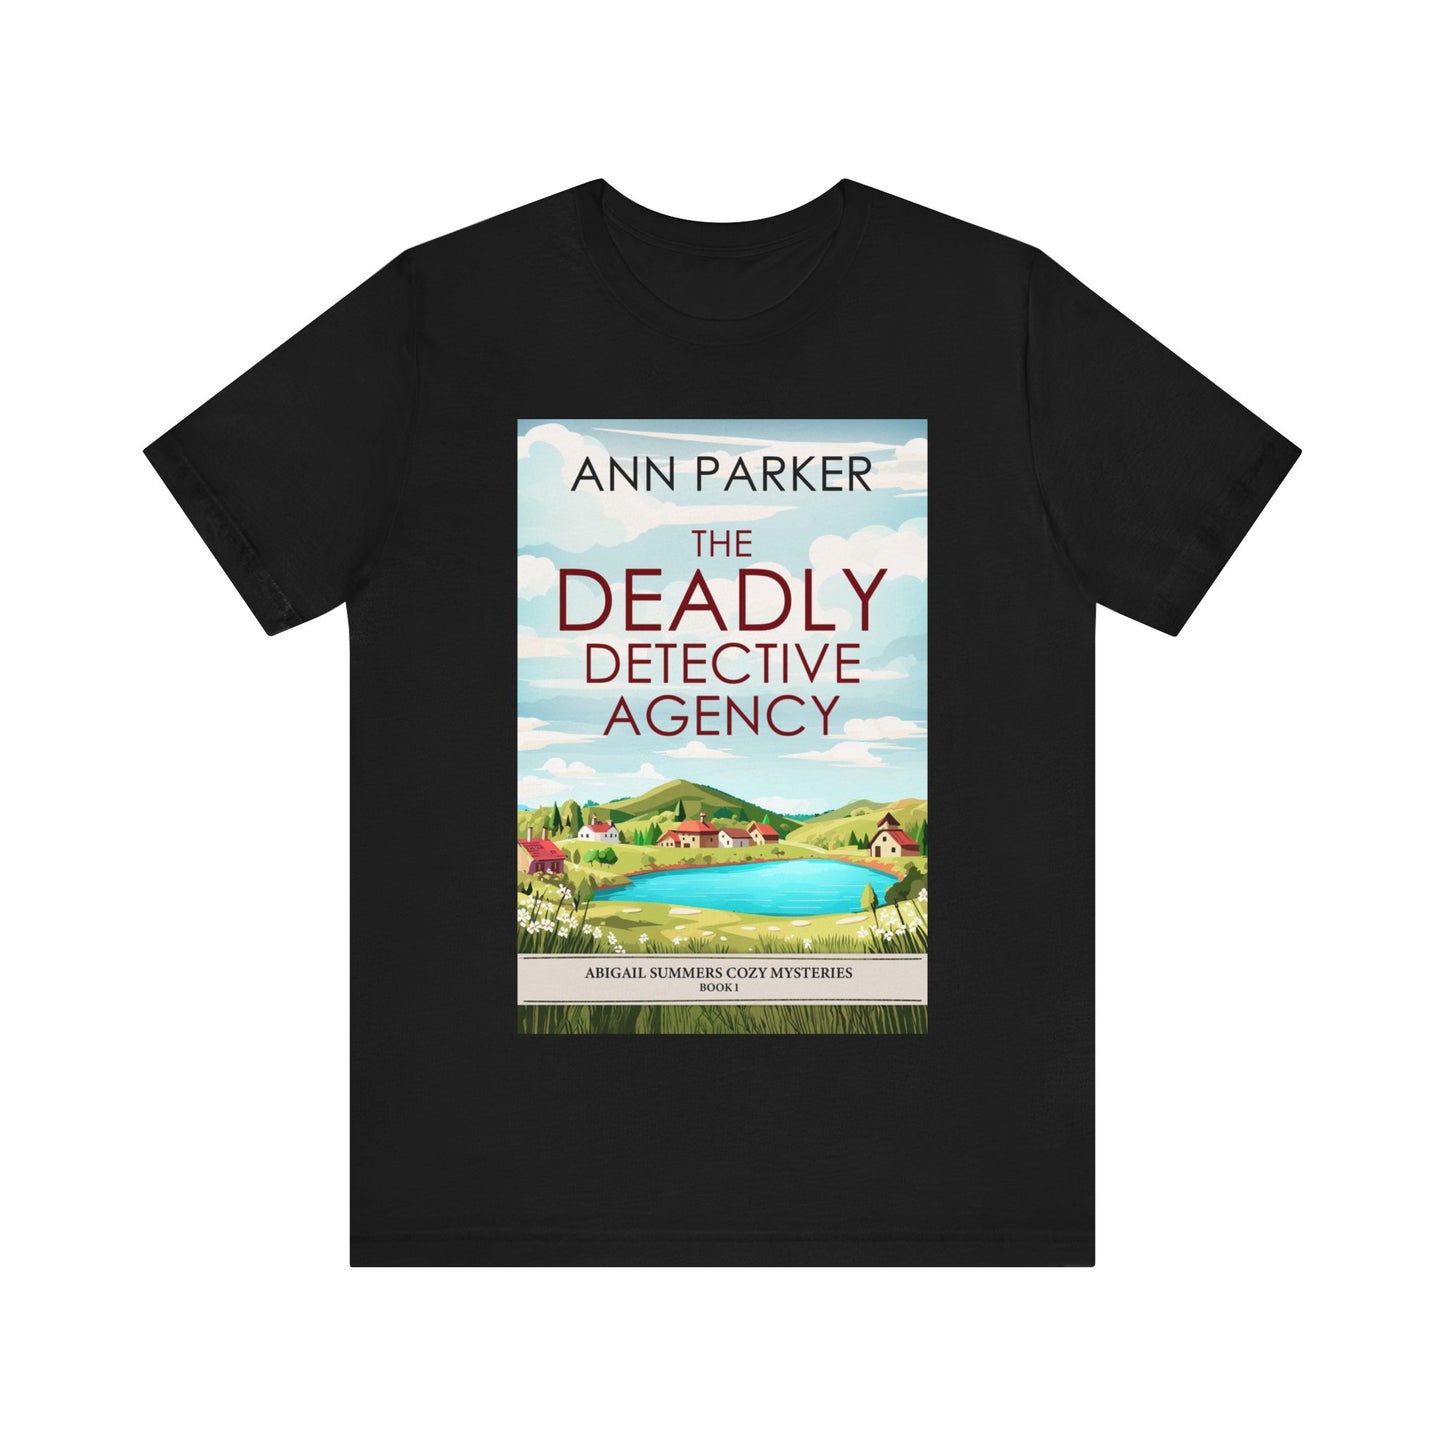 The Deadly Detective Agency - Unisex Jersey Short Sleeve T-Shirt